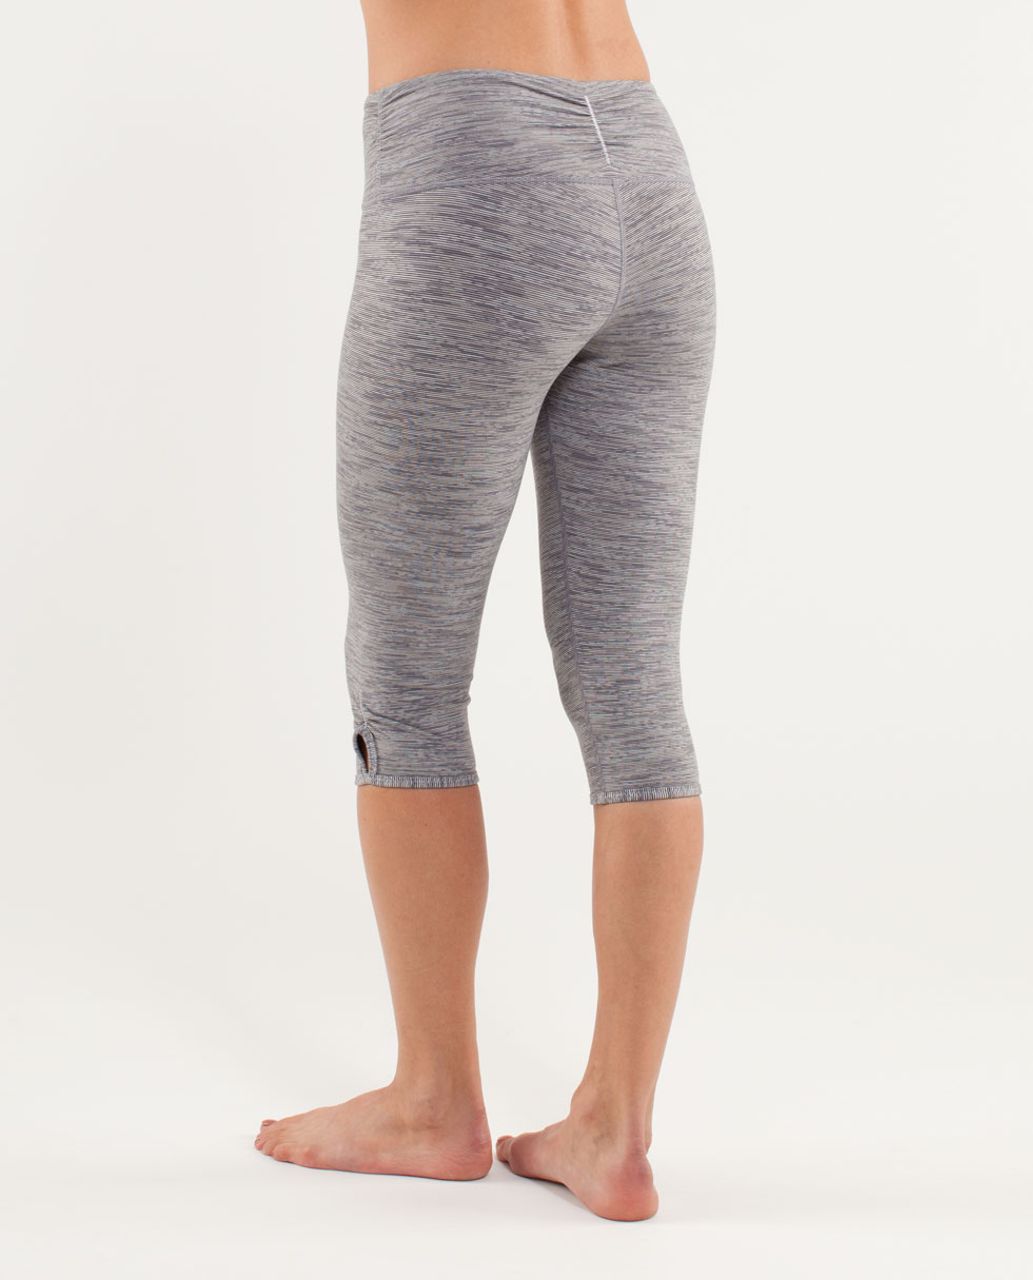 Lululemon Dhanurasana Crop - Wee Are From Space Coal Fossil